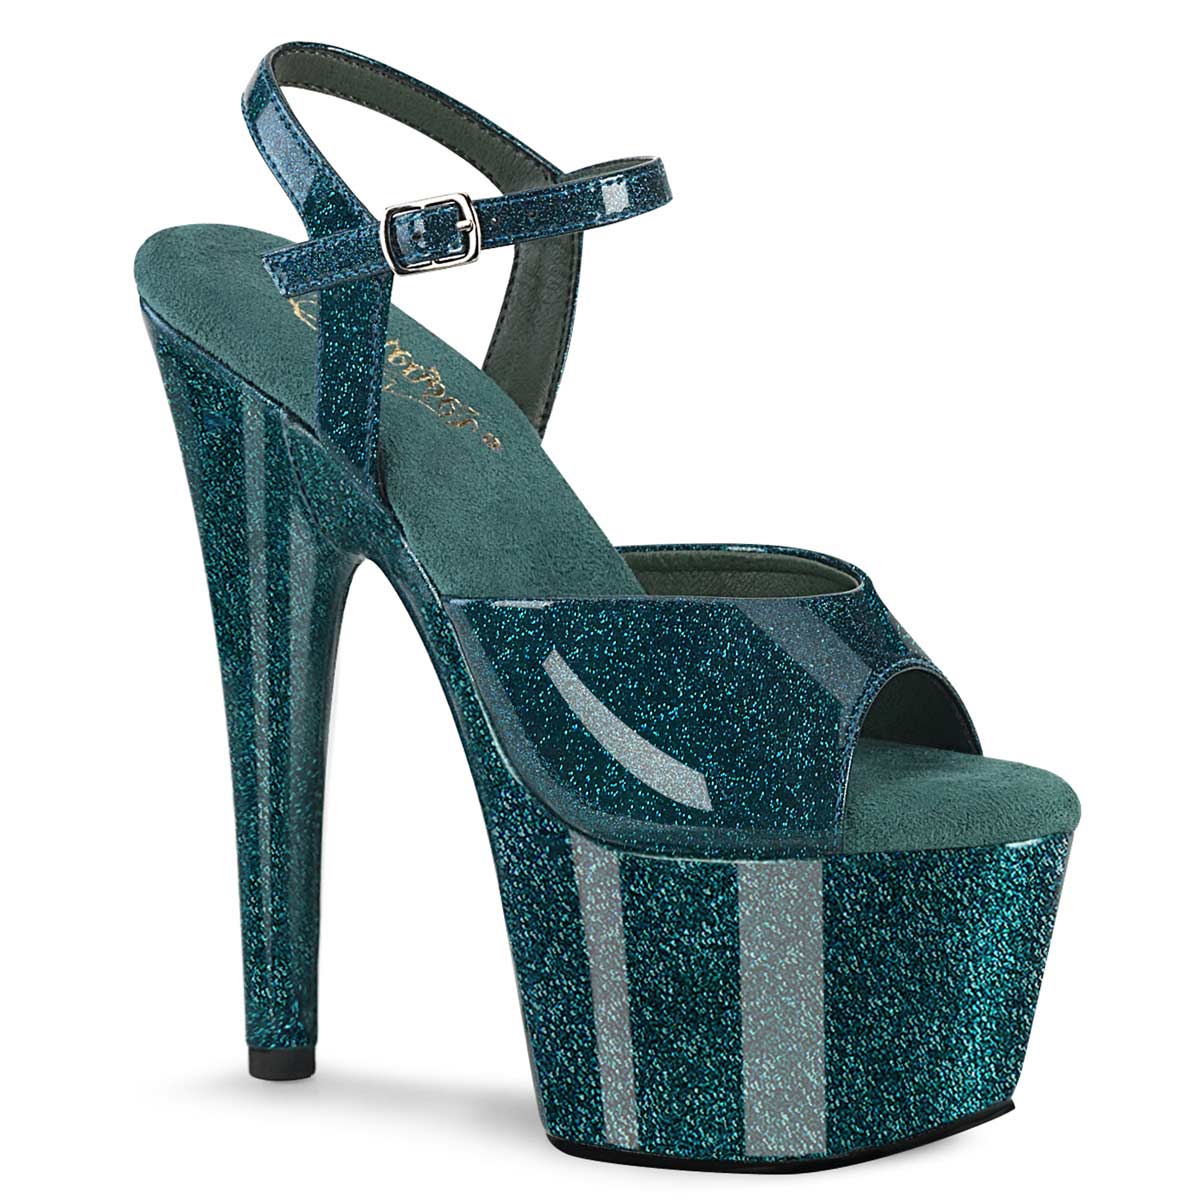 Gianvito Rossi Portofino Platform Sandals Teal Suede Size 36.5 Ankle S –  Celebrity Owned